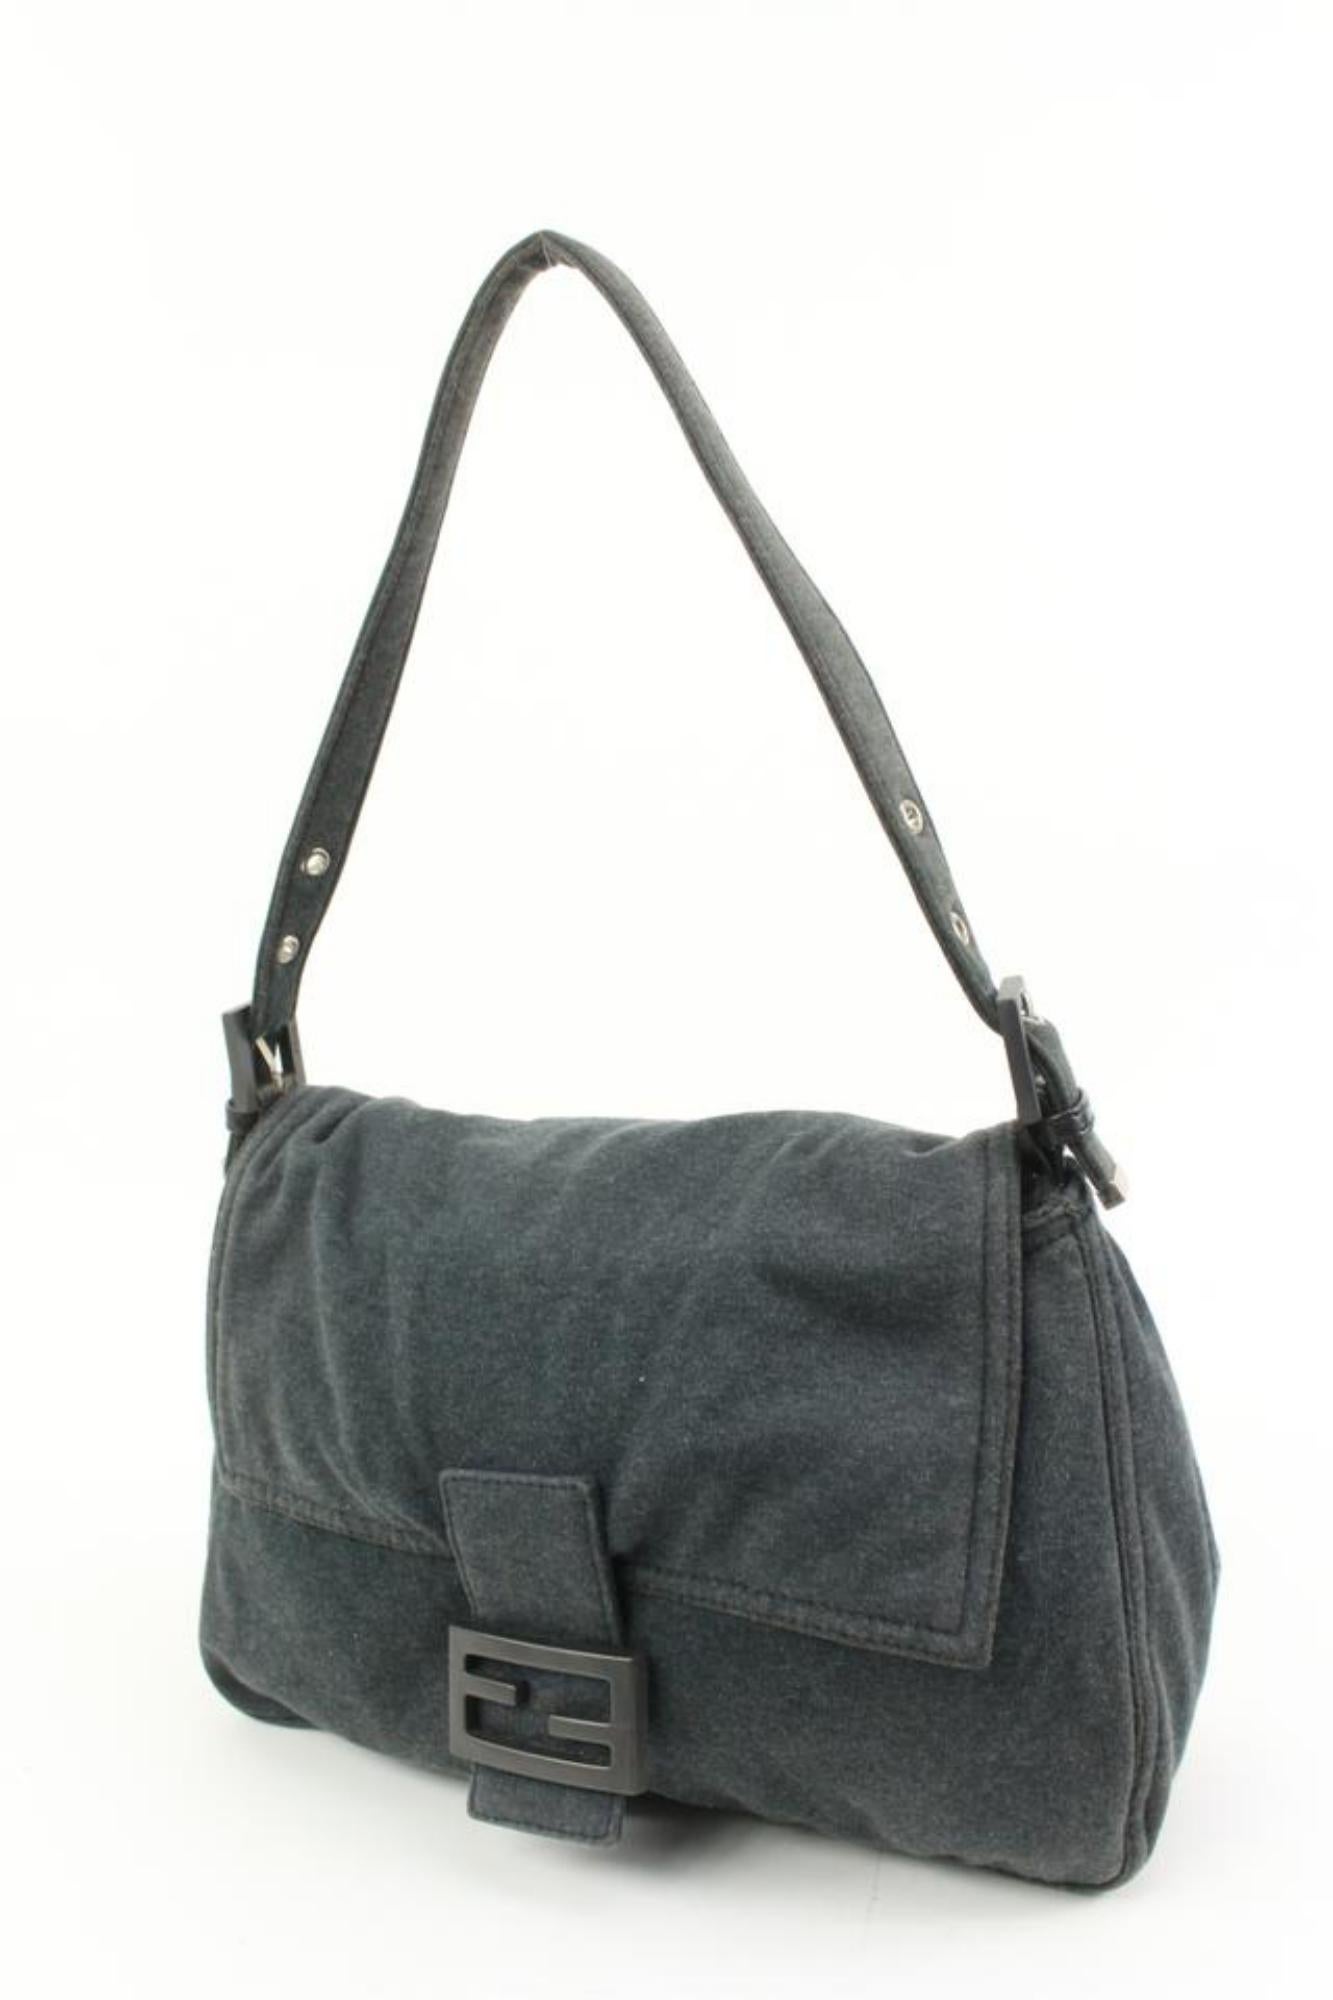 Fendi Charcoal Grey Jersey Mama Baguette Shoulder Flap 32f413s
Date Code/Serial Number: 2308-26325-098
Made In: Italy
Measurements: Length:  12